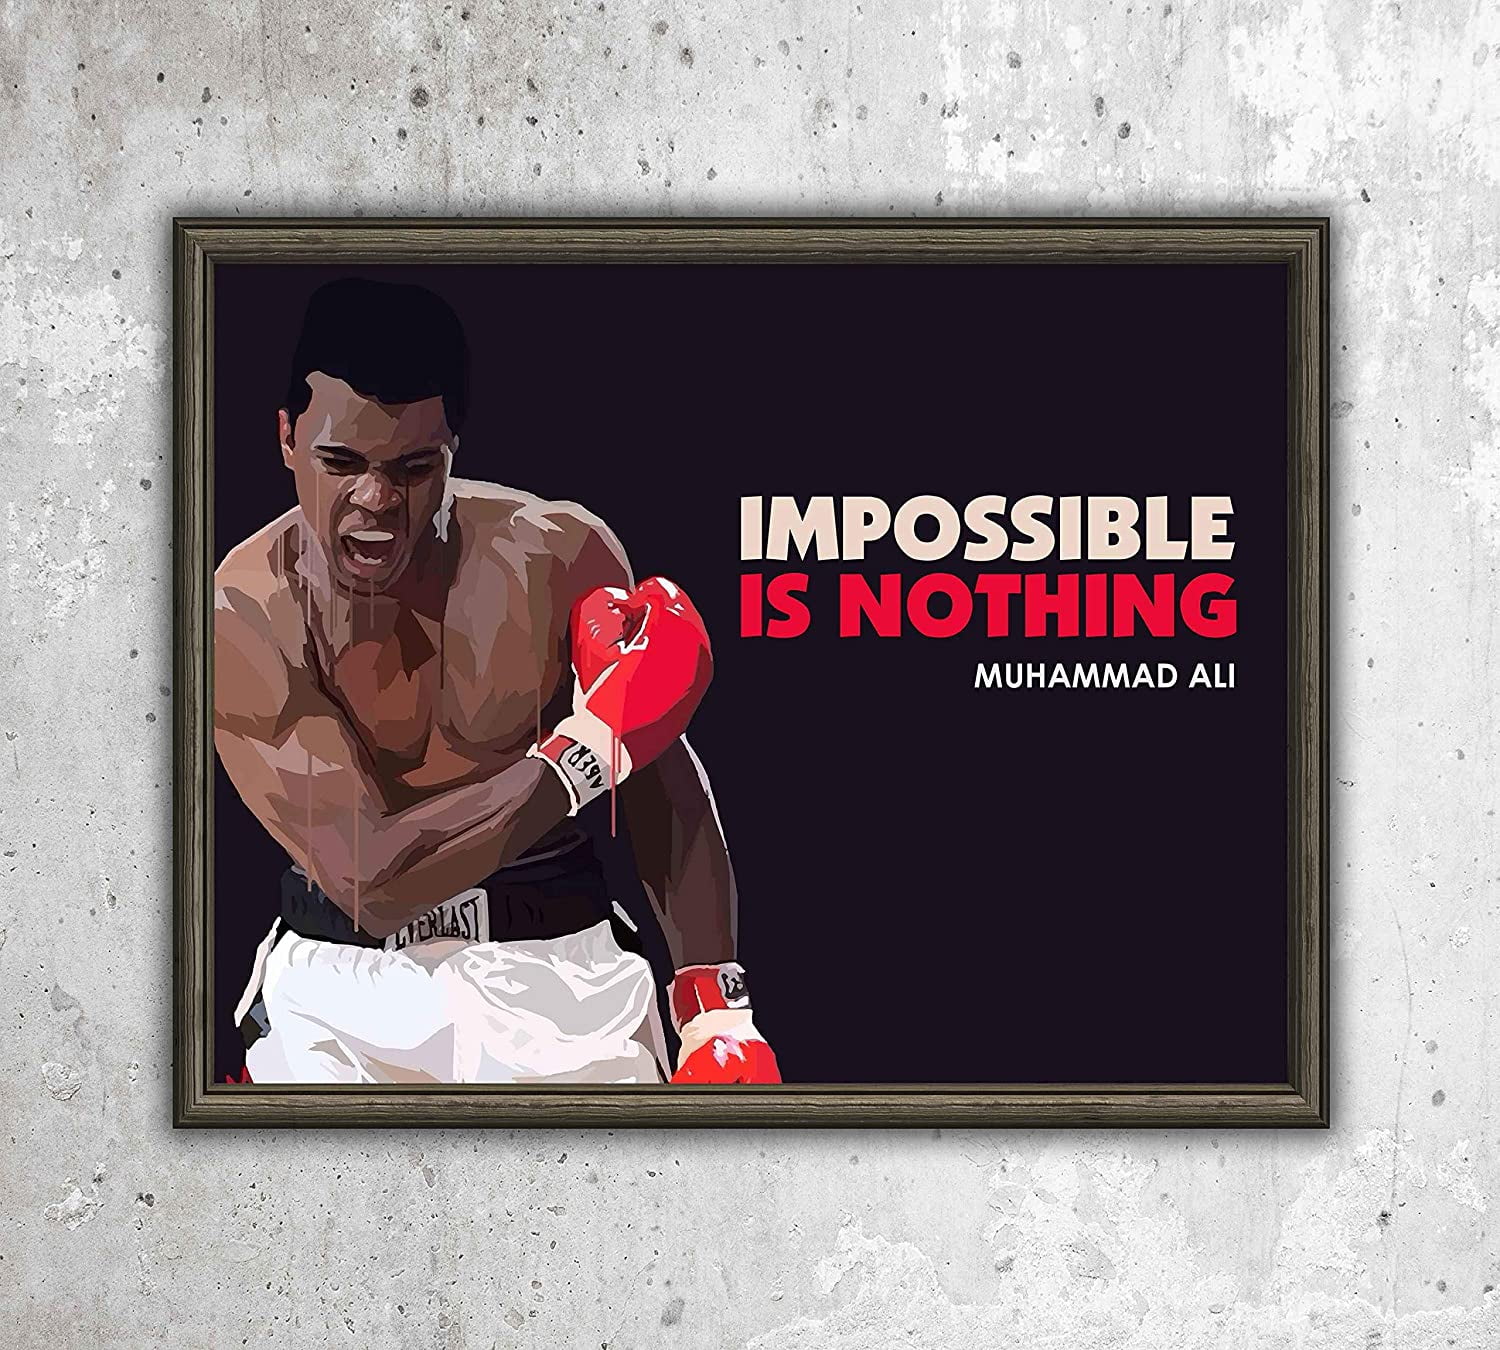 Muhammad Ali 11 Boxer Sports Fight Poster Motivational Inspirational Quote Photo 